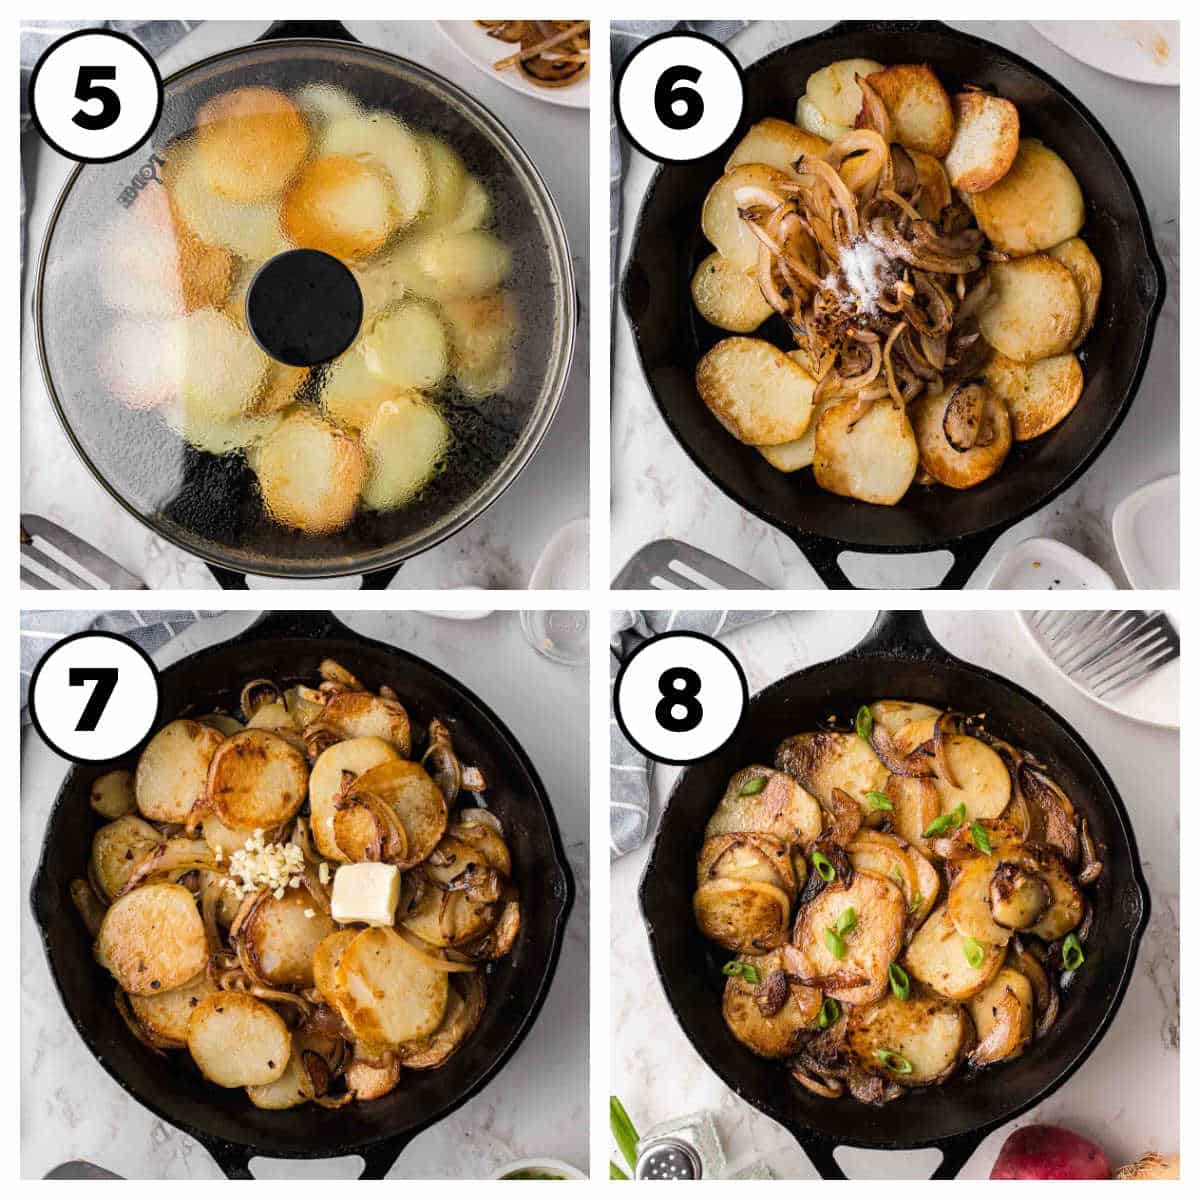 Steps 5-8 of how to make fried potatoes and onions.